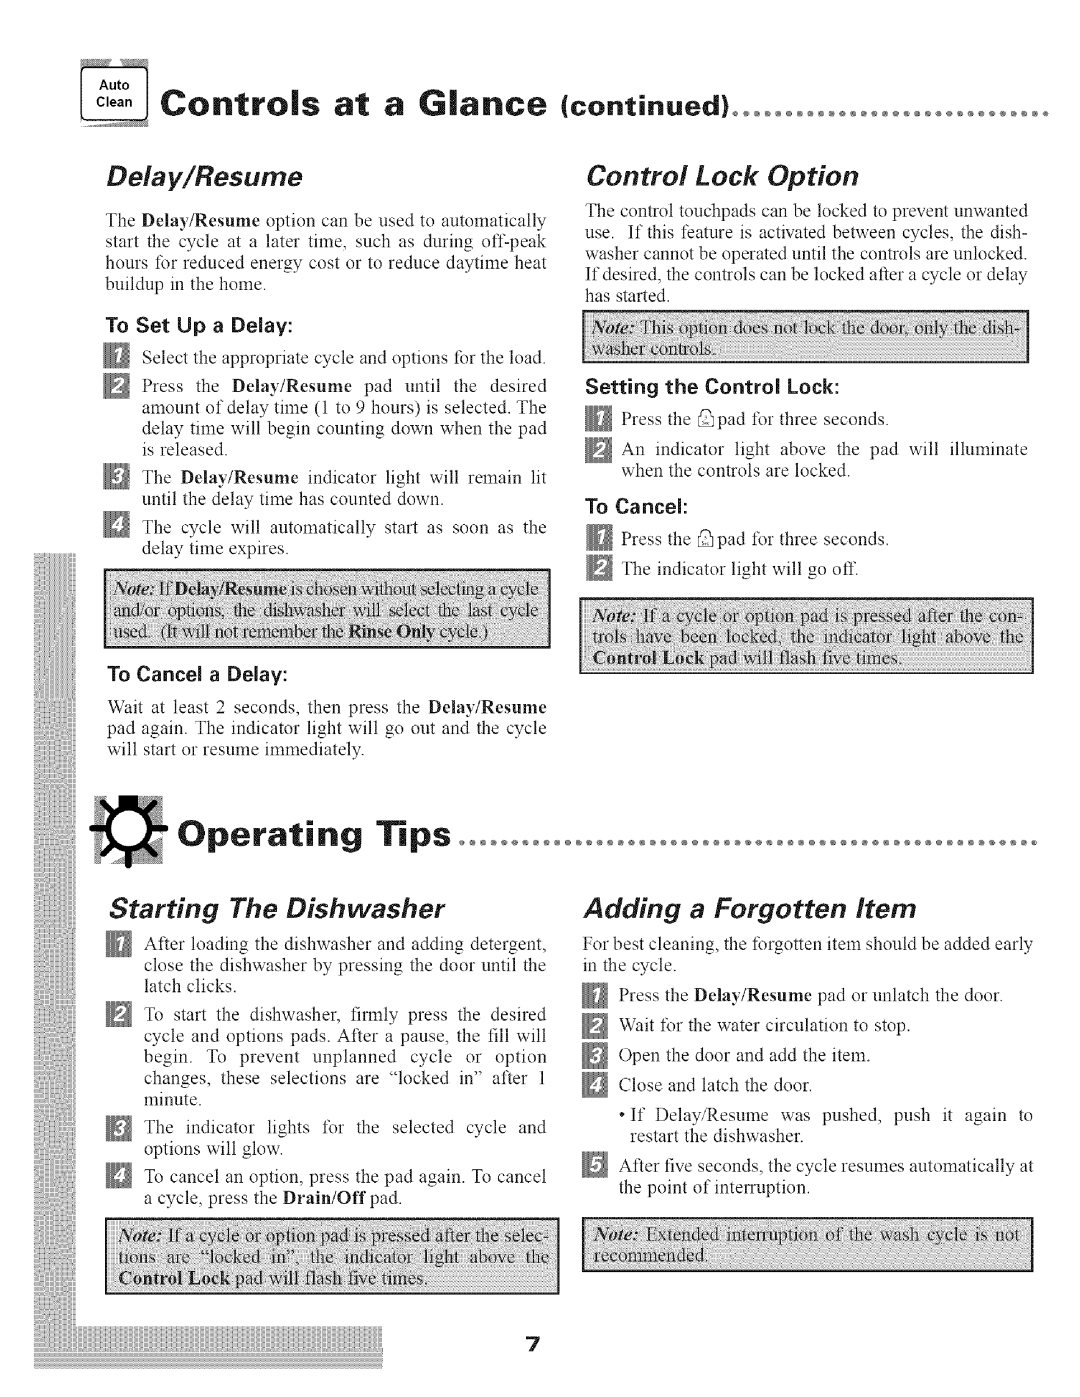 Maytag MDB9100 manual Operating, Tips, Control Lock Option, Adding, a Forgotten, Delay/Resume, To Cancel, To Set Up a Delay 